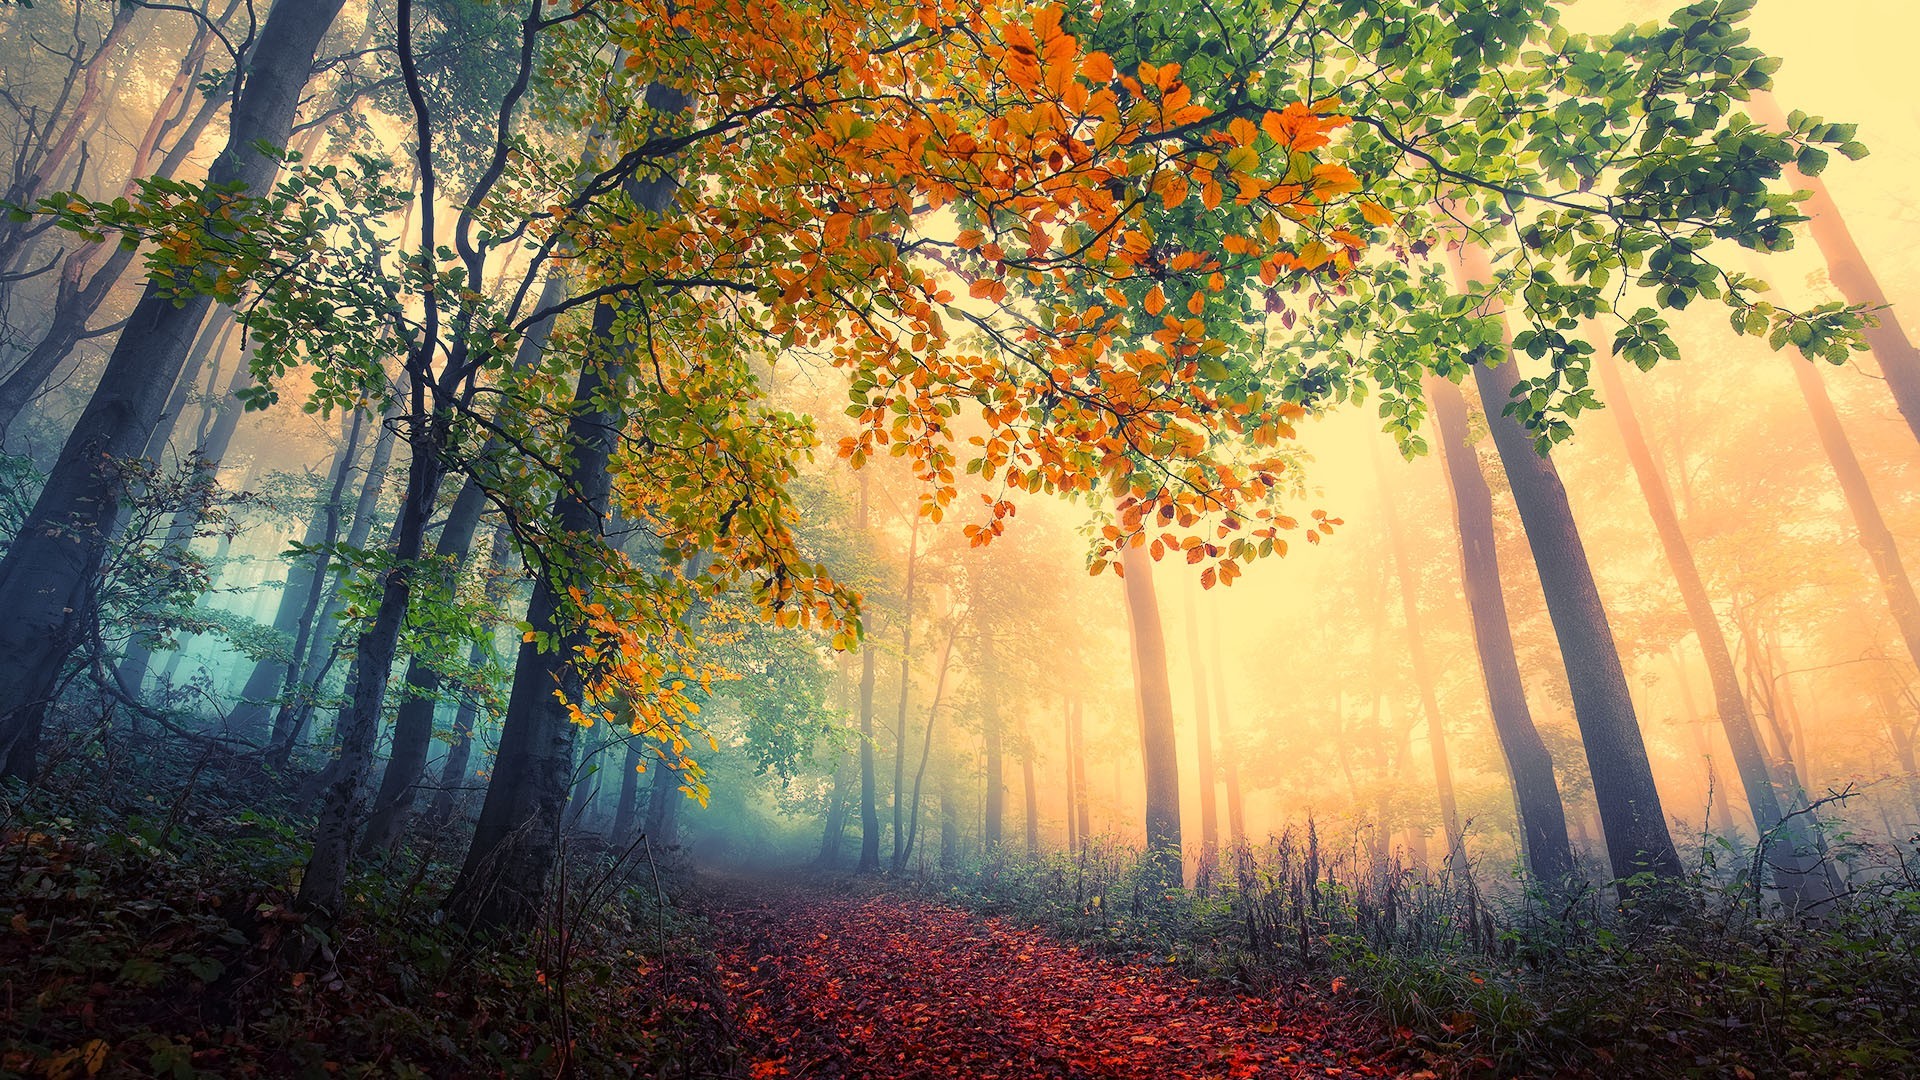 General 1920x1080 trees fall red leaves mist forest nature outdoors plants